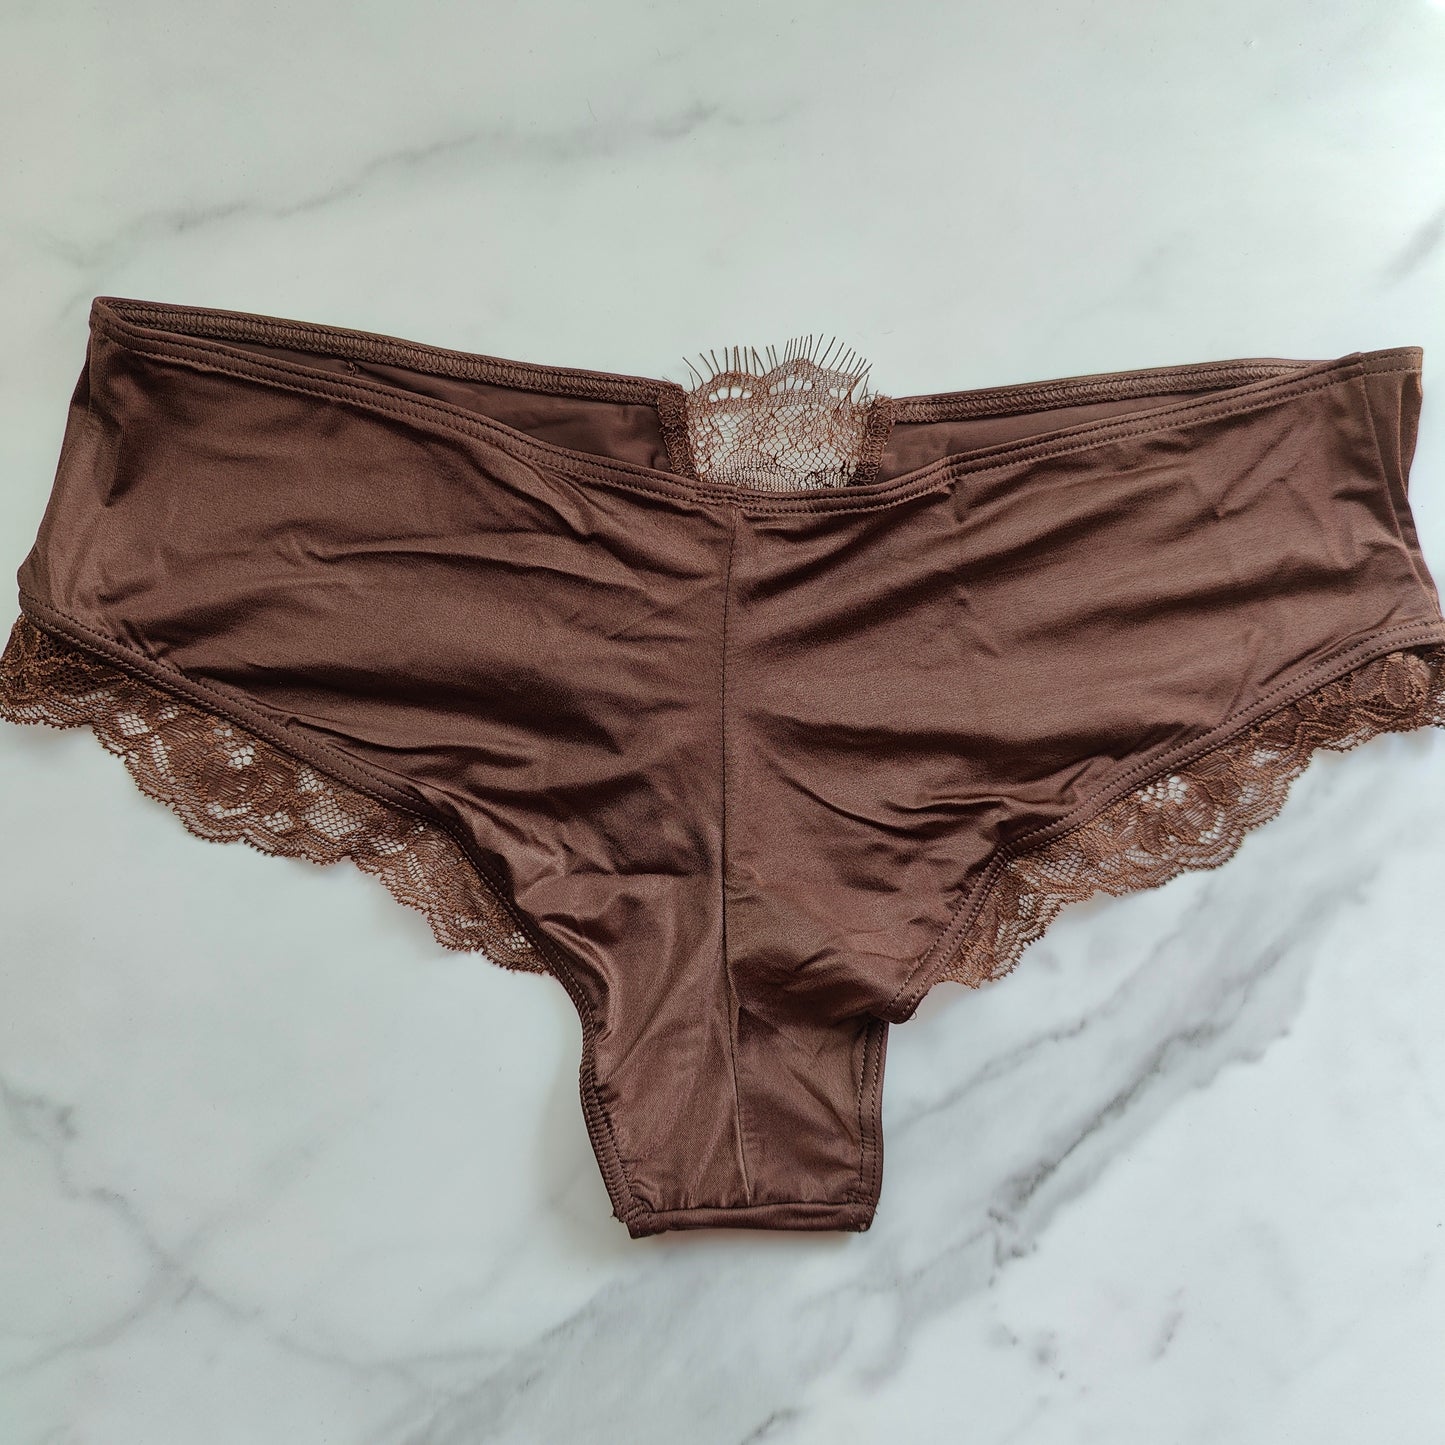 Simply Lace Mid-Rise Cheeky Panty